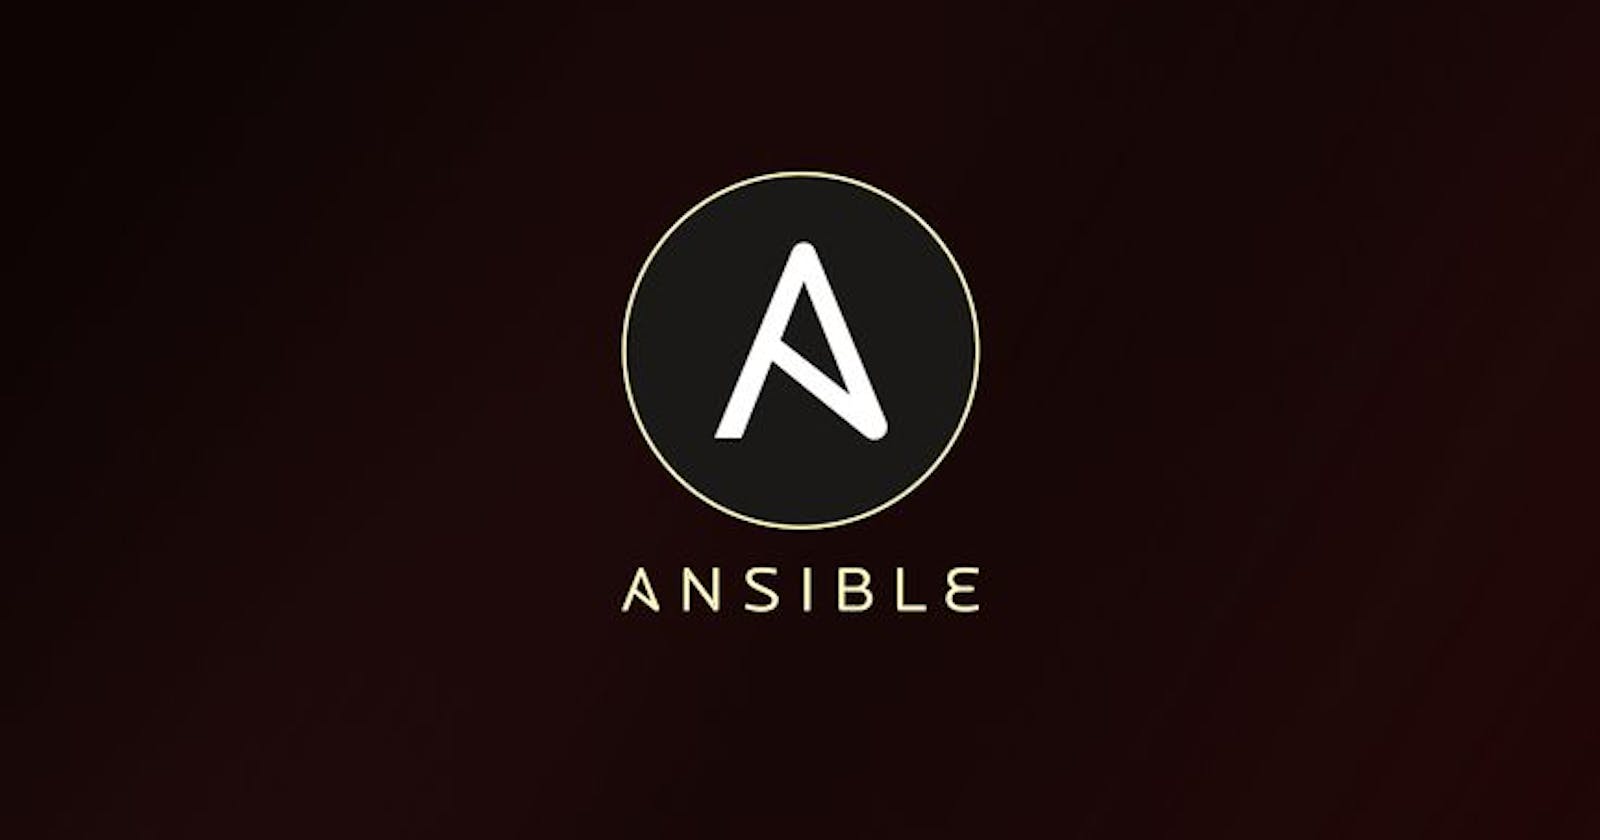 Ansible - The DevOps Tool.